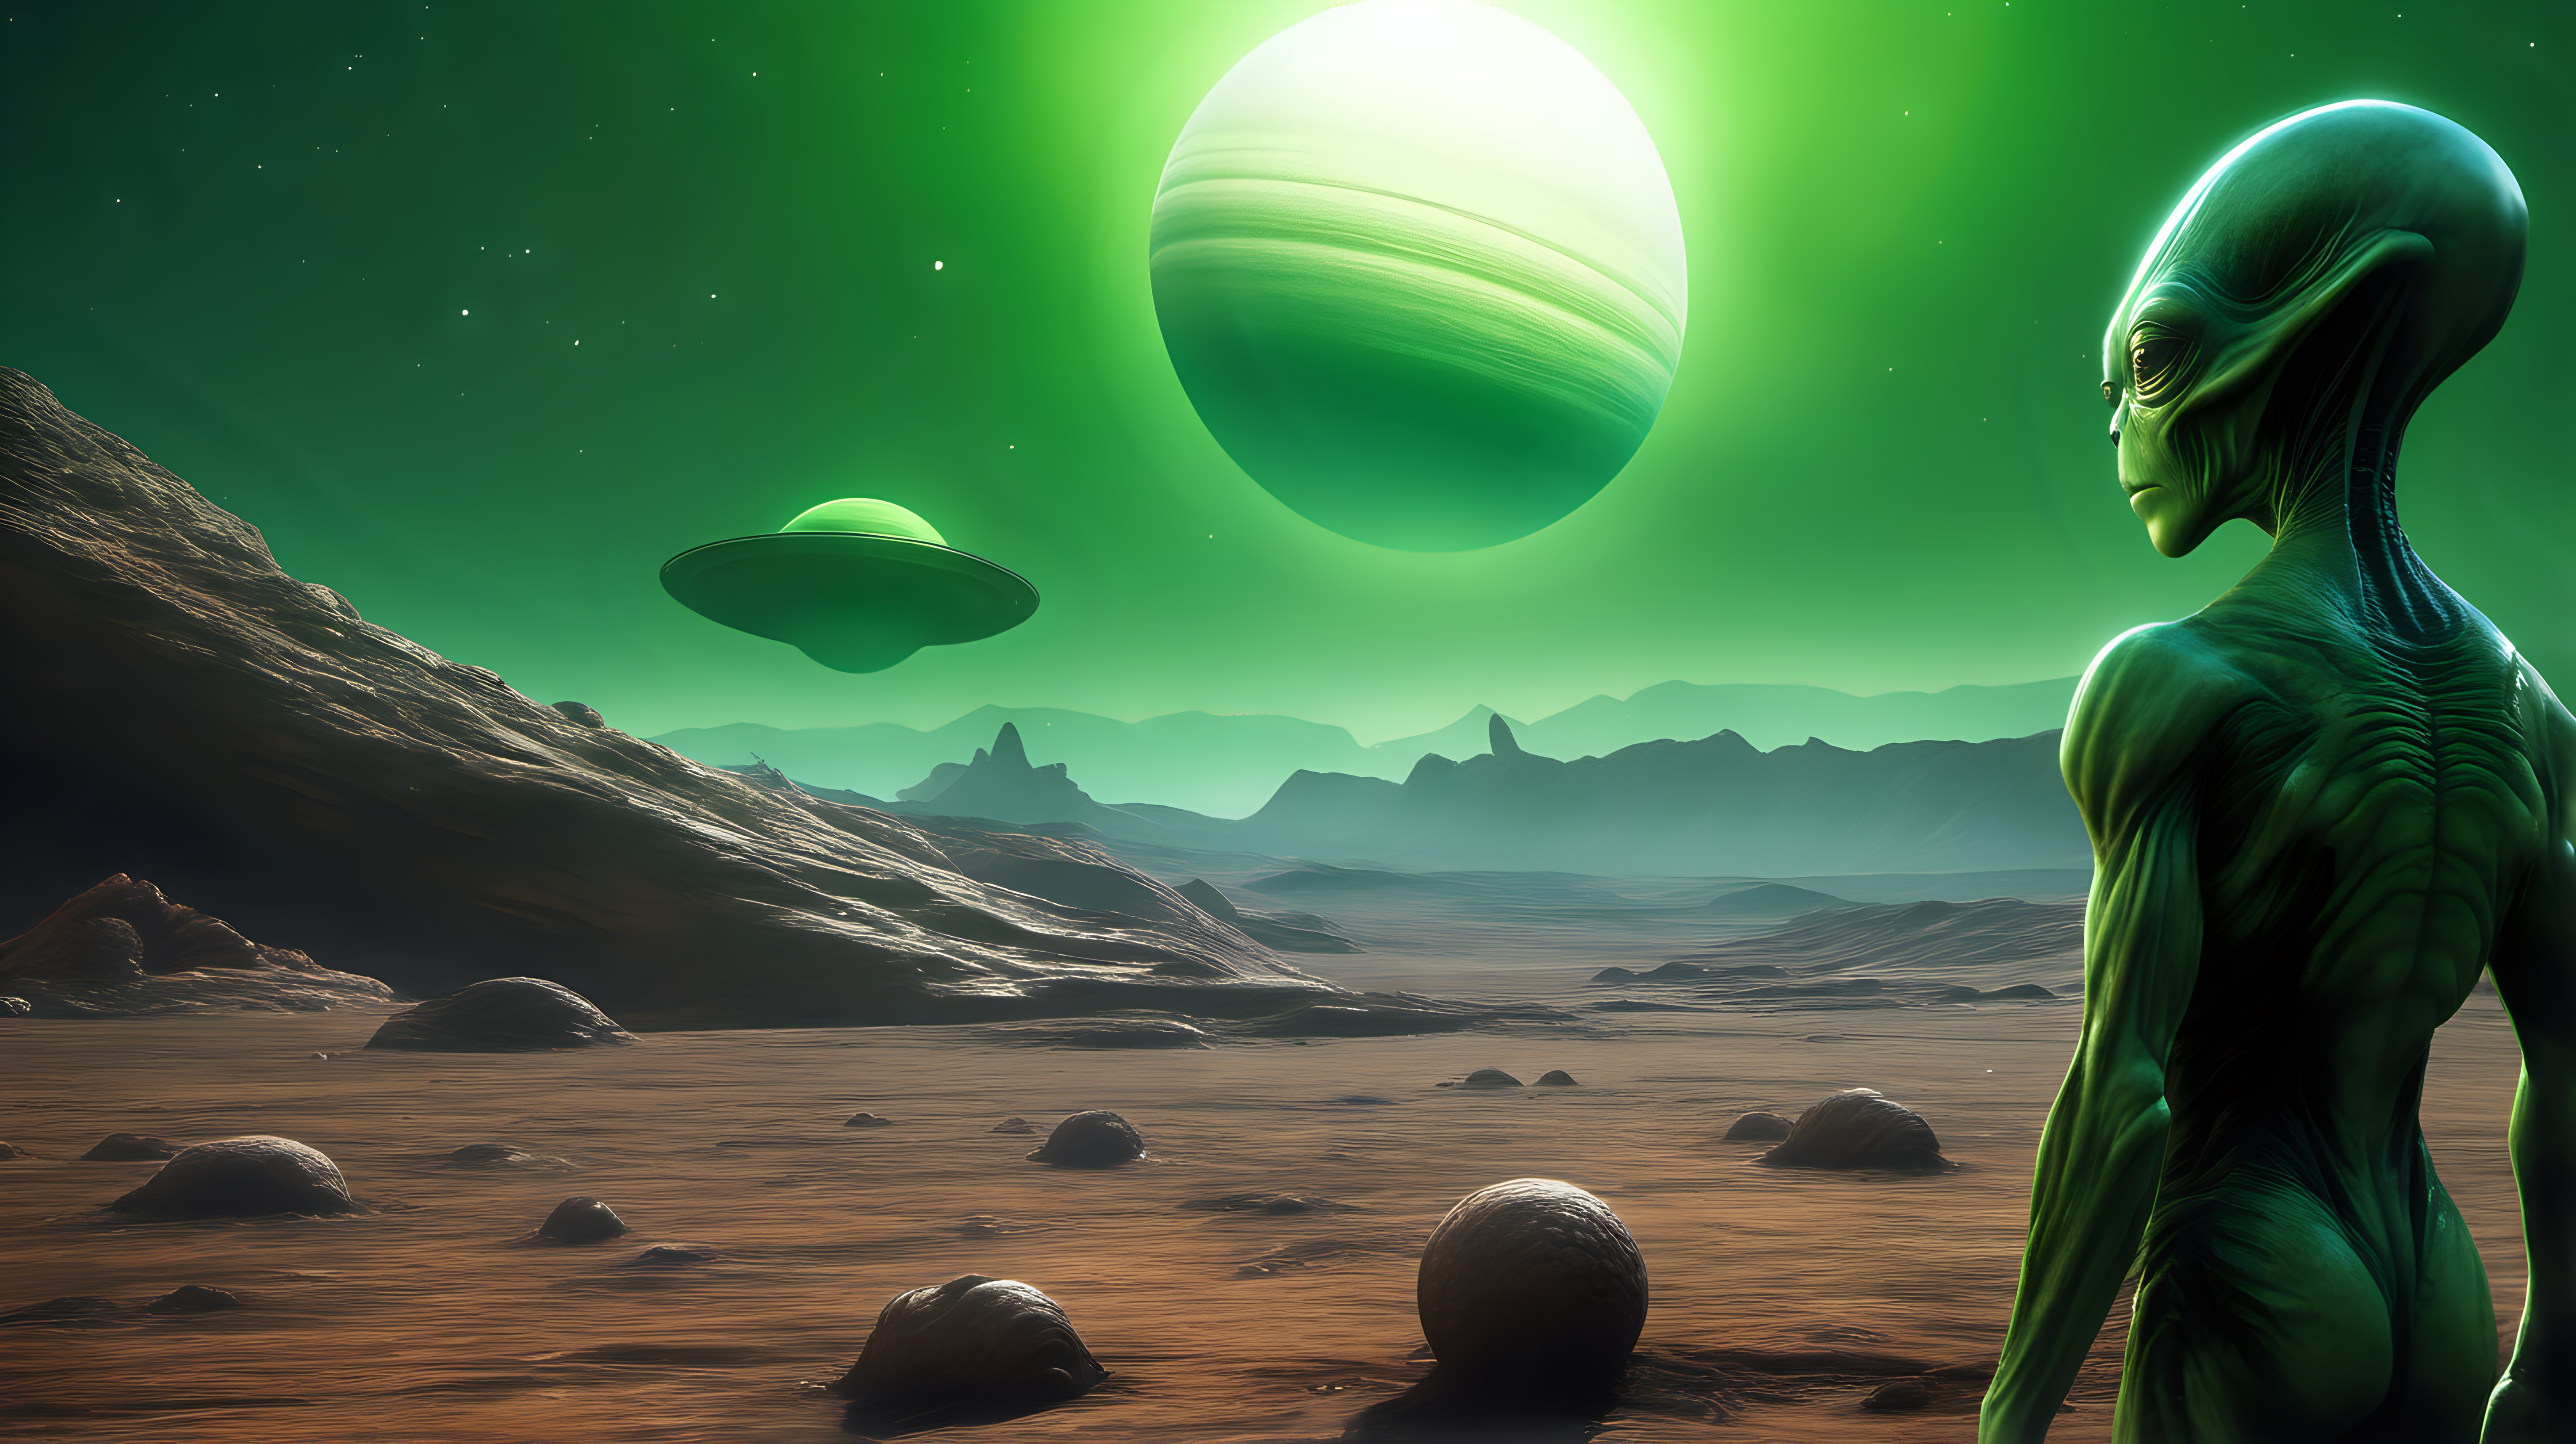 A green alien in the foreground on an alien planet, a ringed planet in the sky behind him.